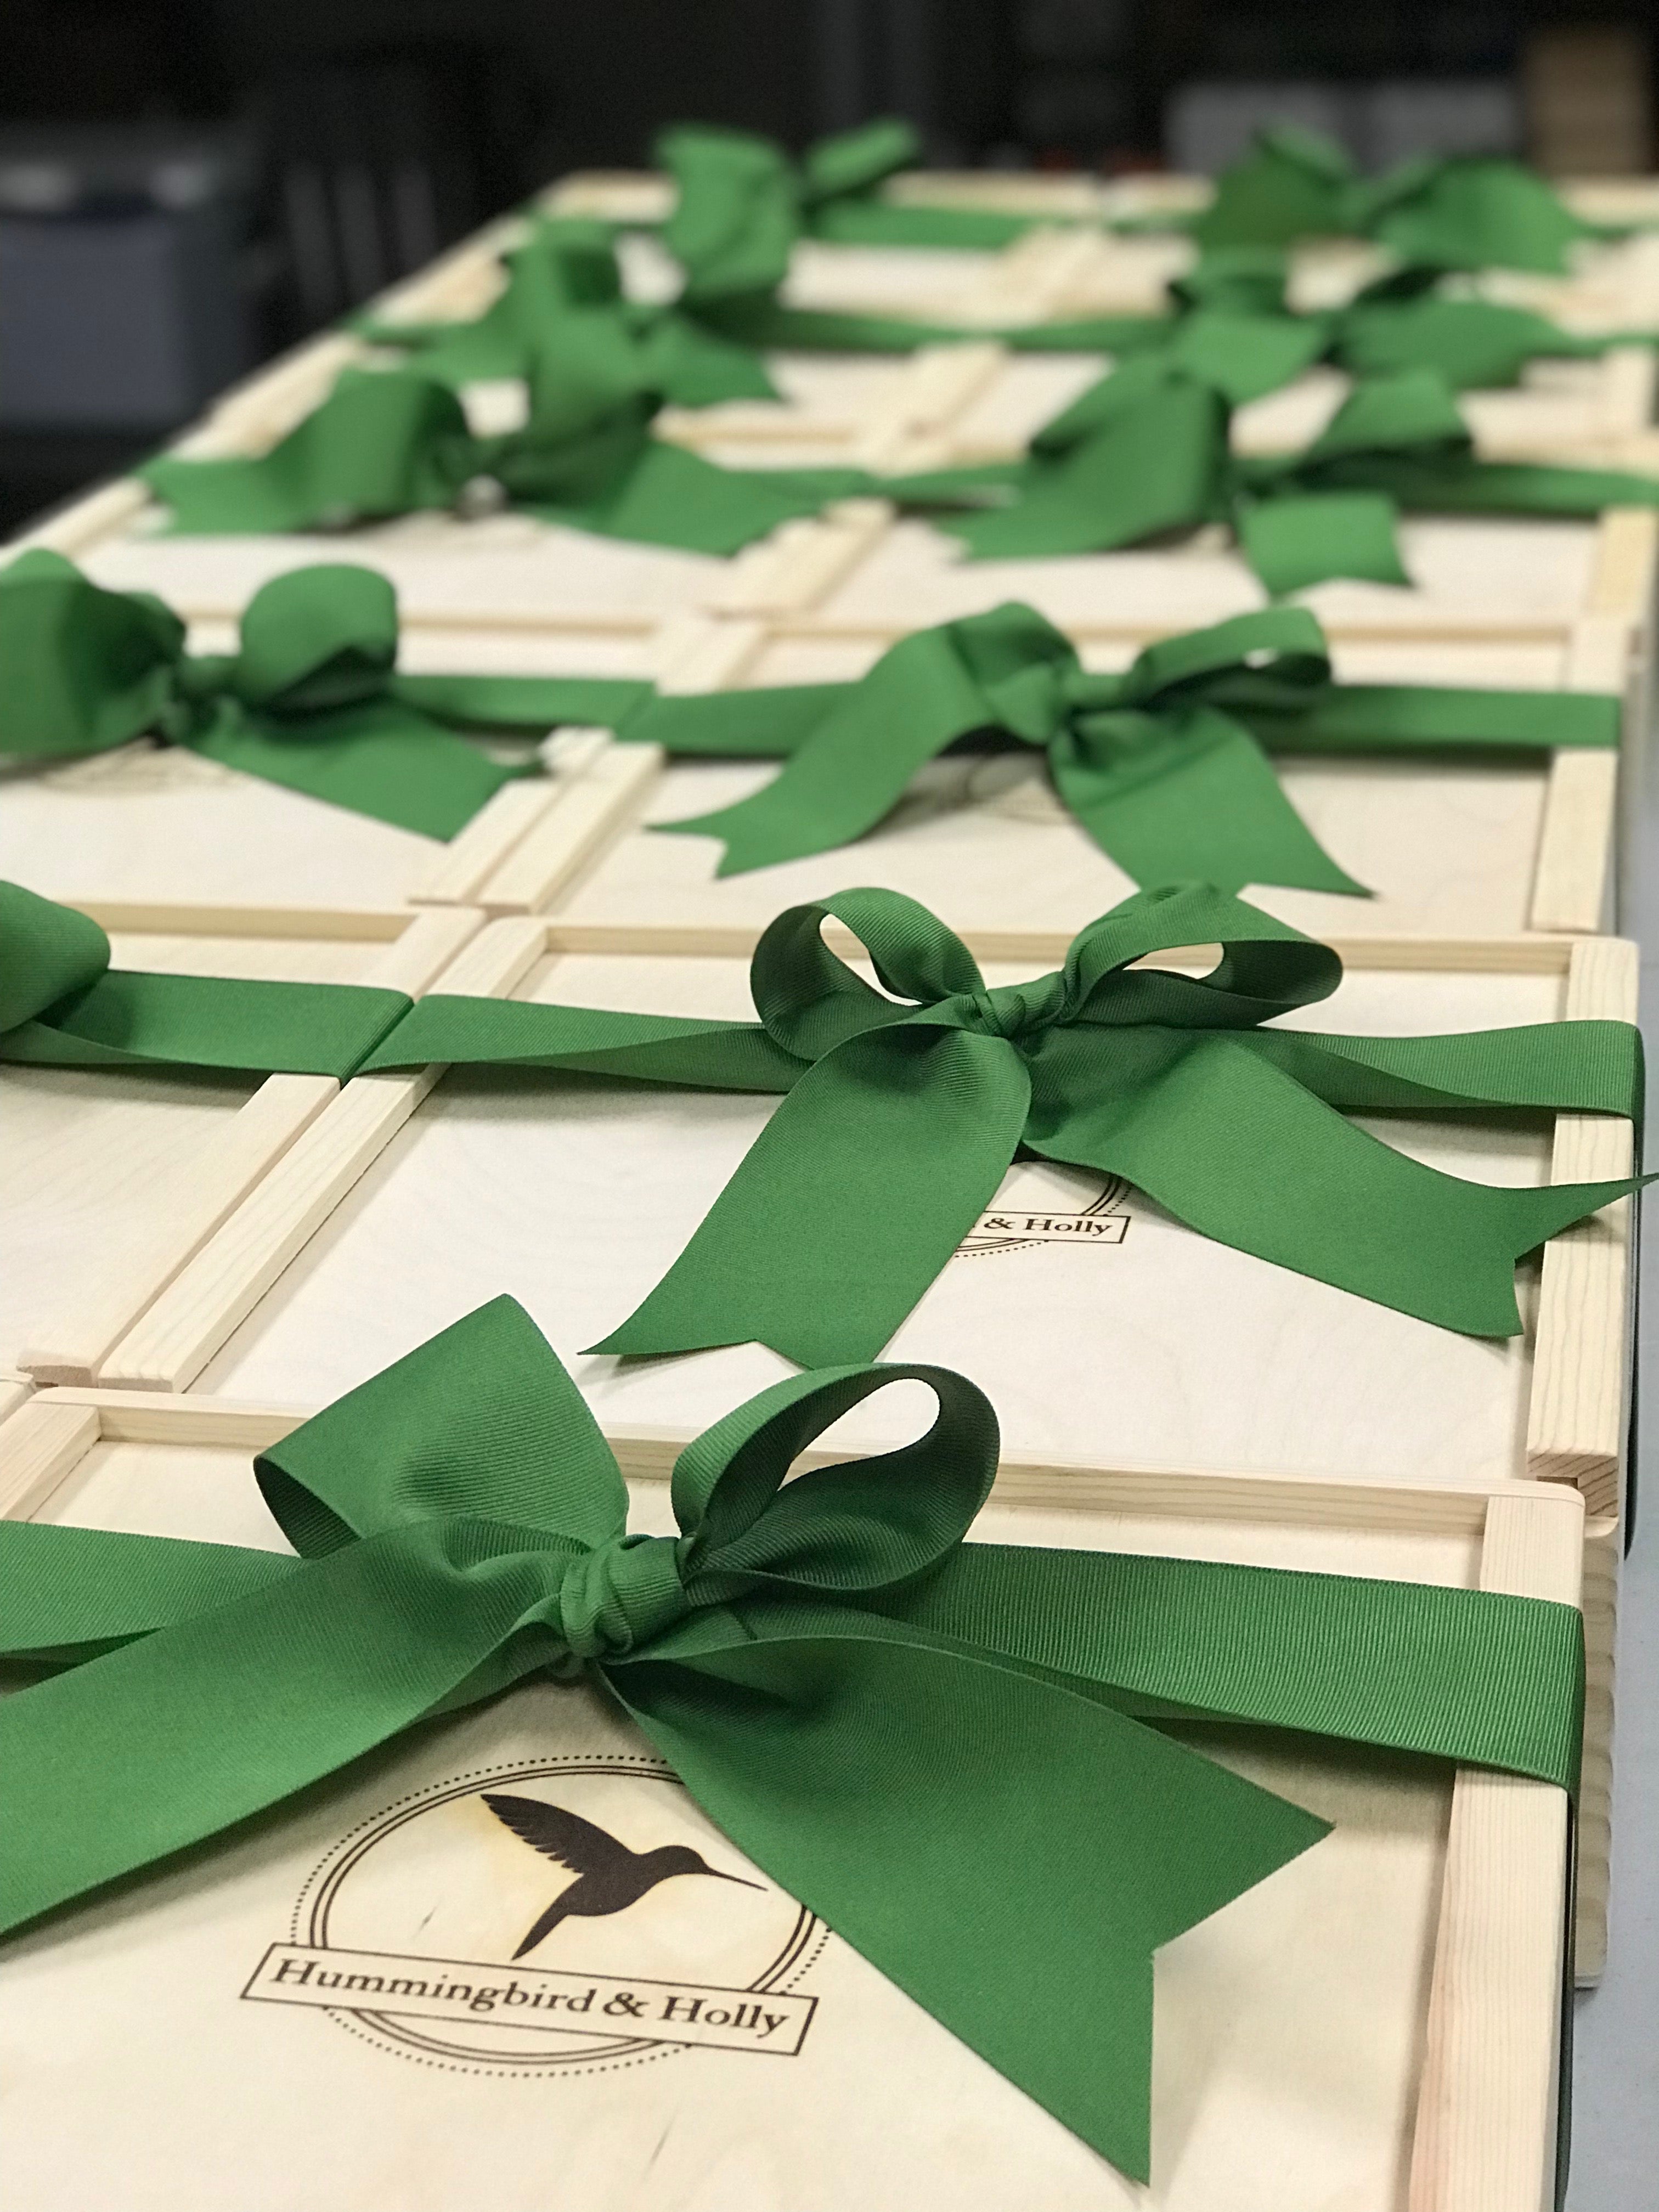 six wooden gift boxes with the Hummingbird and Holly logo, tied with green ribbon